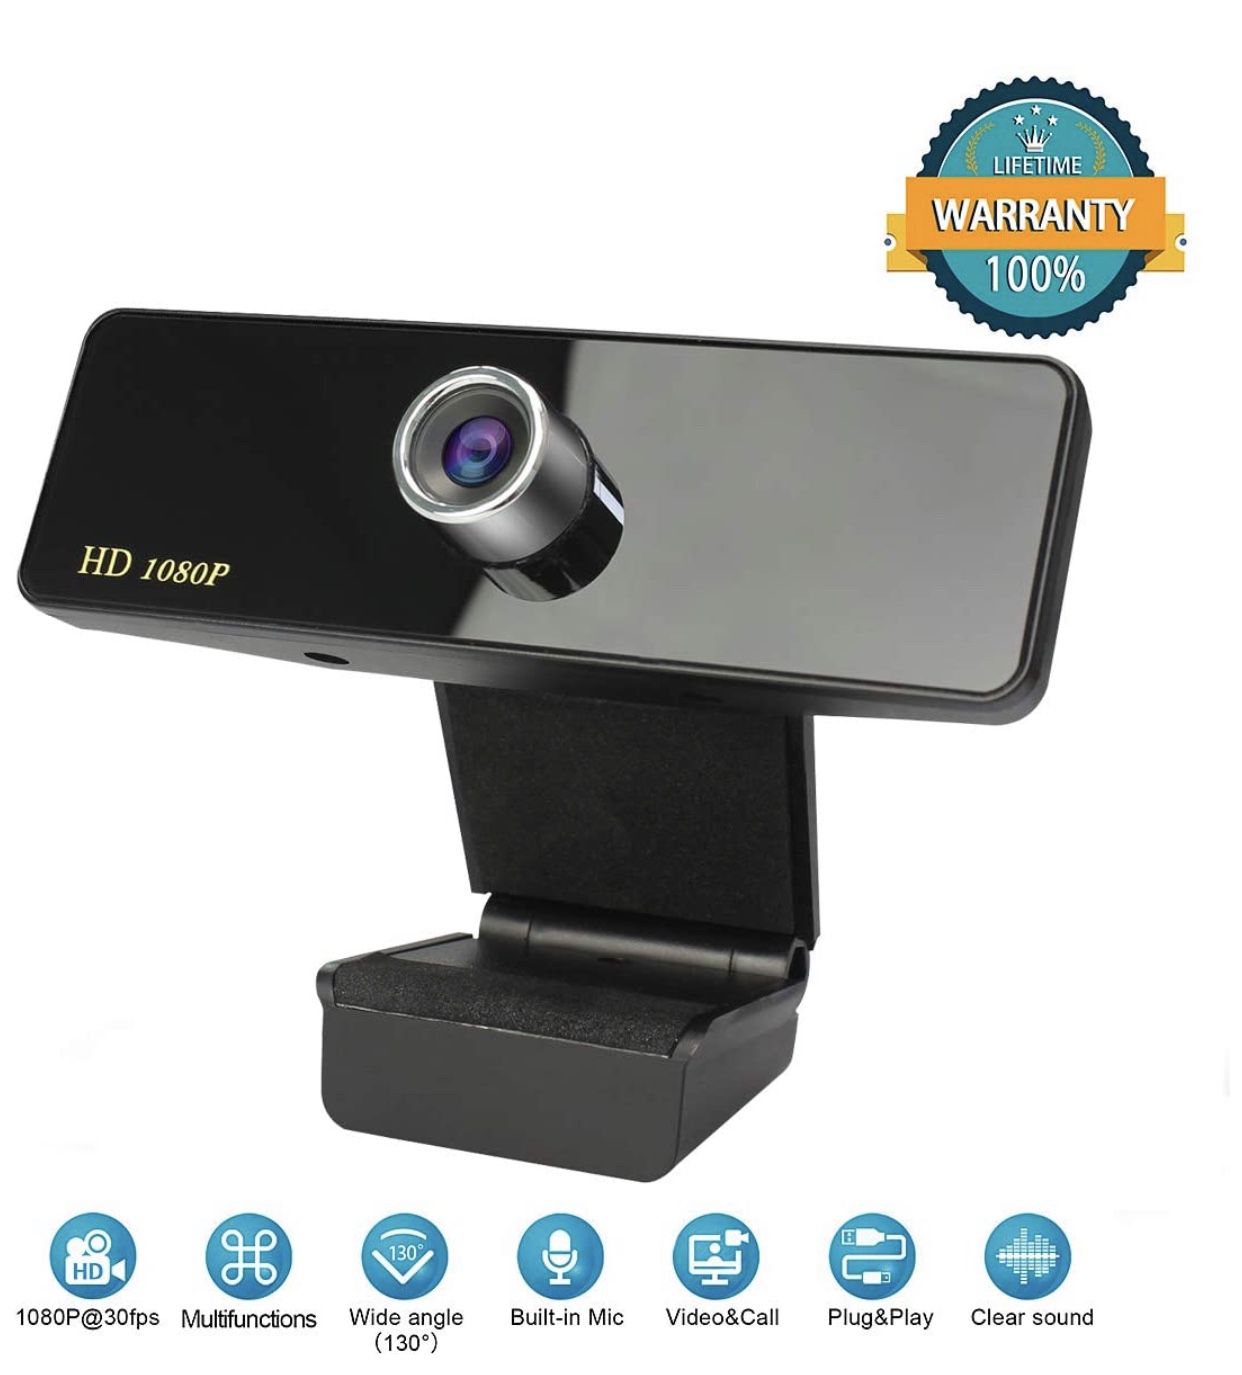 Webcam with Microphone, 1080P HD Webcam Streaming Computer Camera, USB Webcam with Wide Angle Lens & Large Sensor for PC Laptop Desktop Video Calling